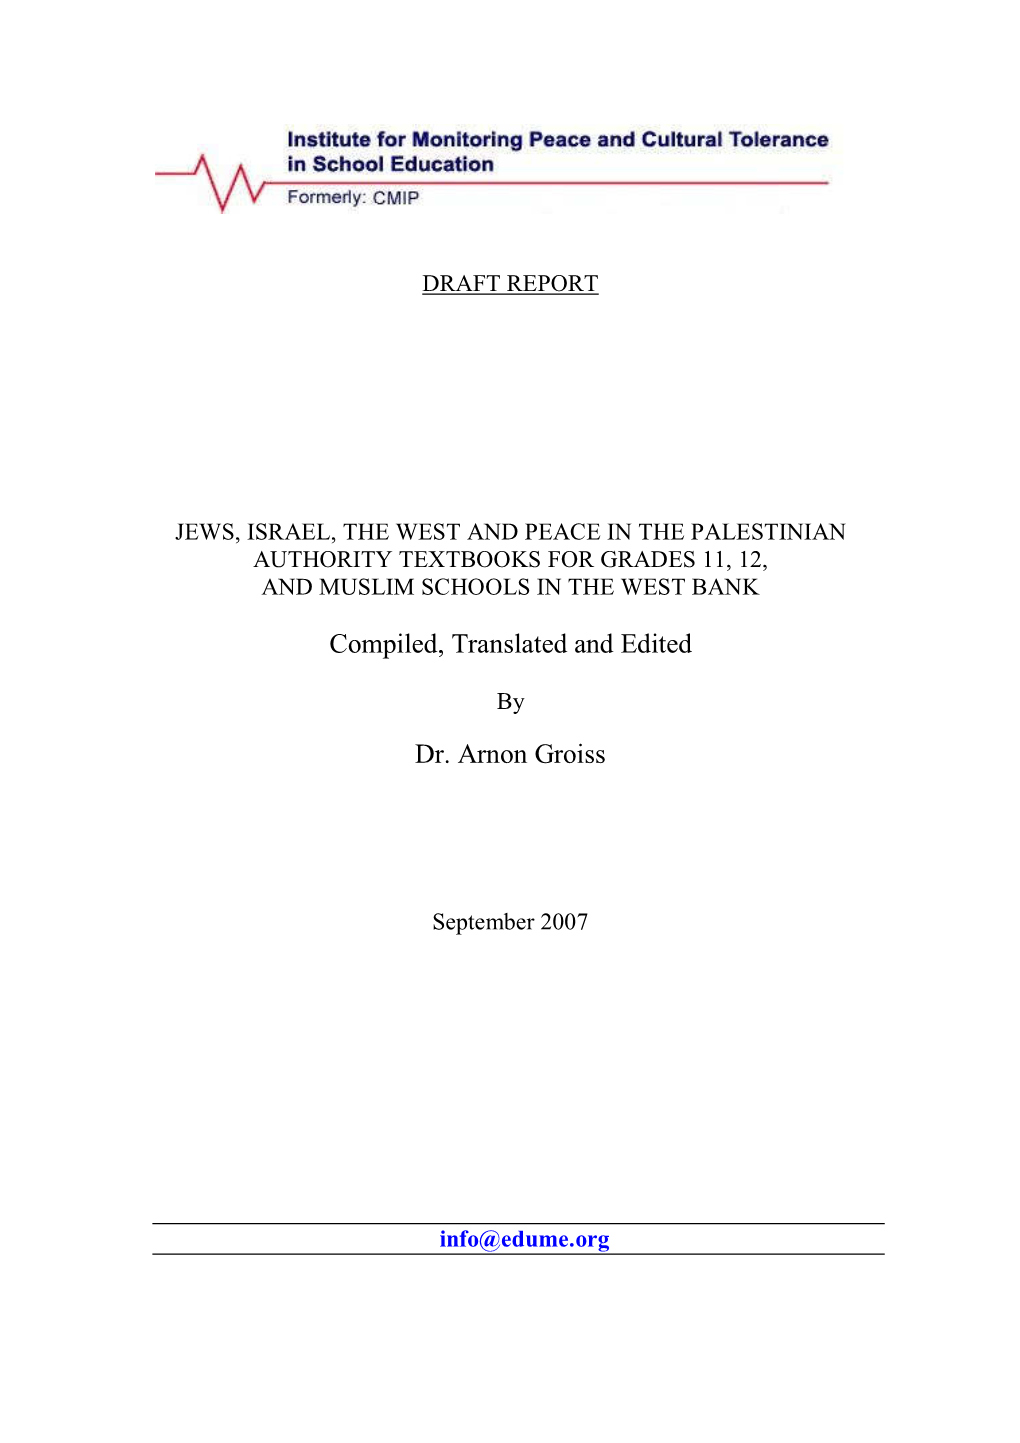 Compiled, Translated and Edited Dr. Arnon Groiss